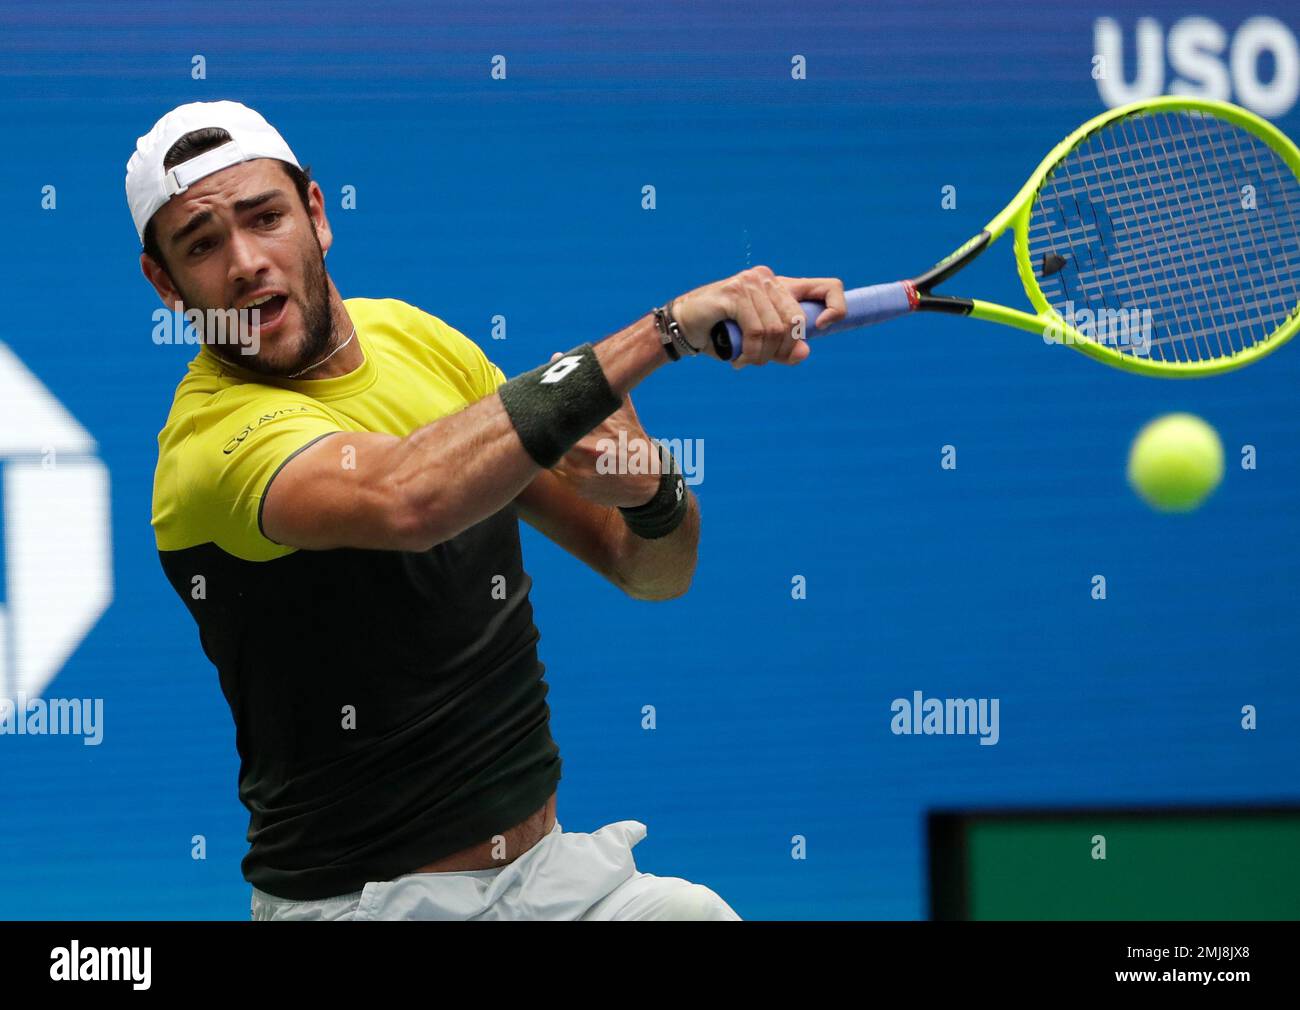 Matteo Berrettini, of Italy, returns to Gael Monfils, of France, during the quarterfinals of the U.S. Open tennis championships Wednesday, Sept